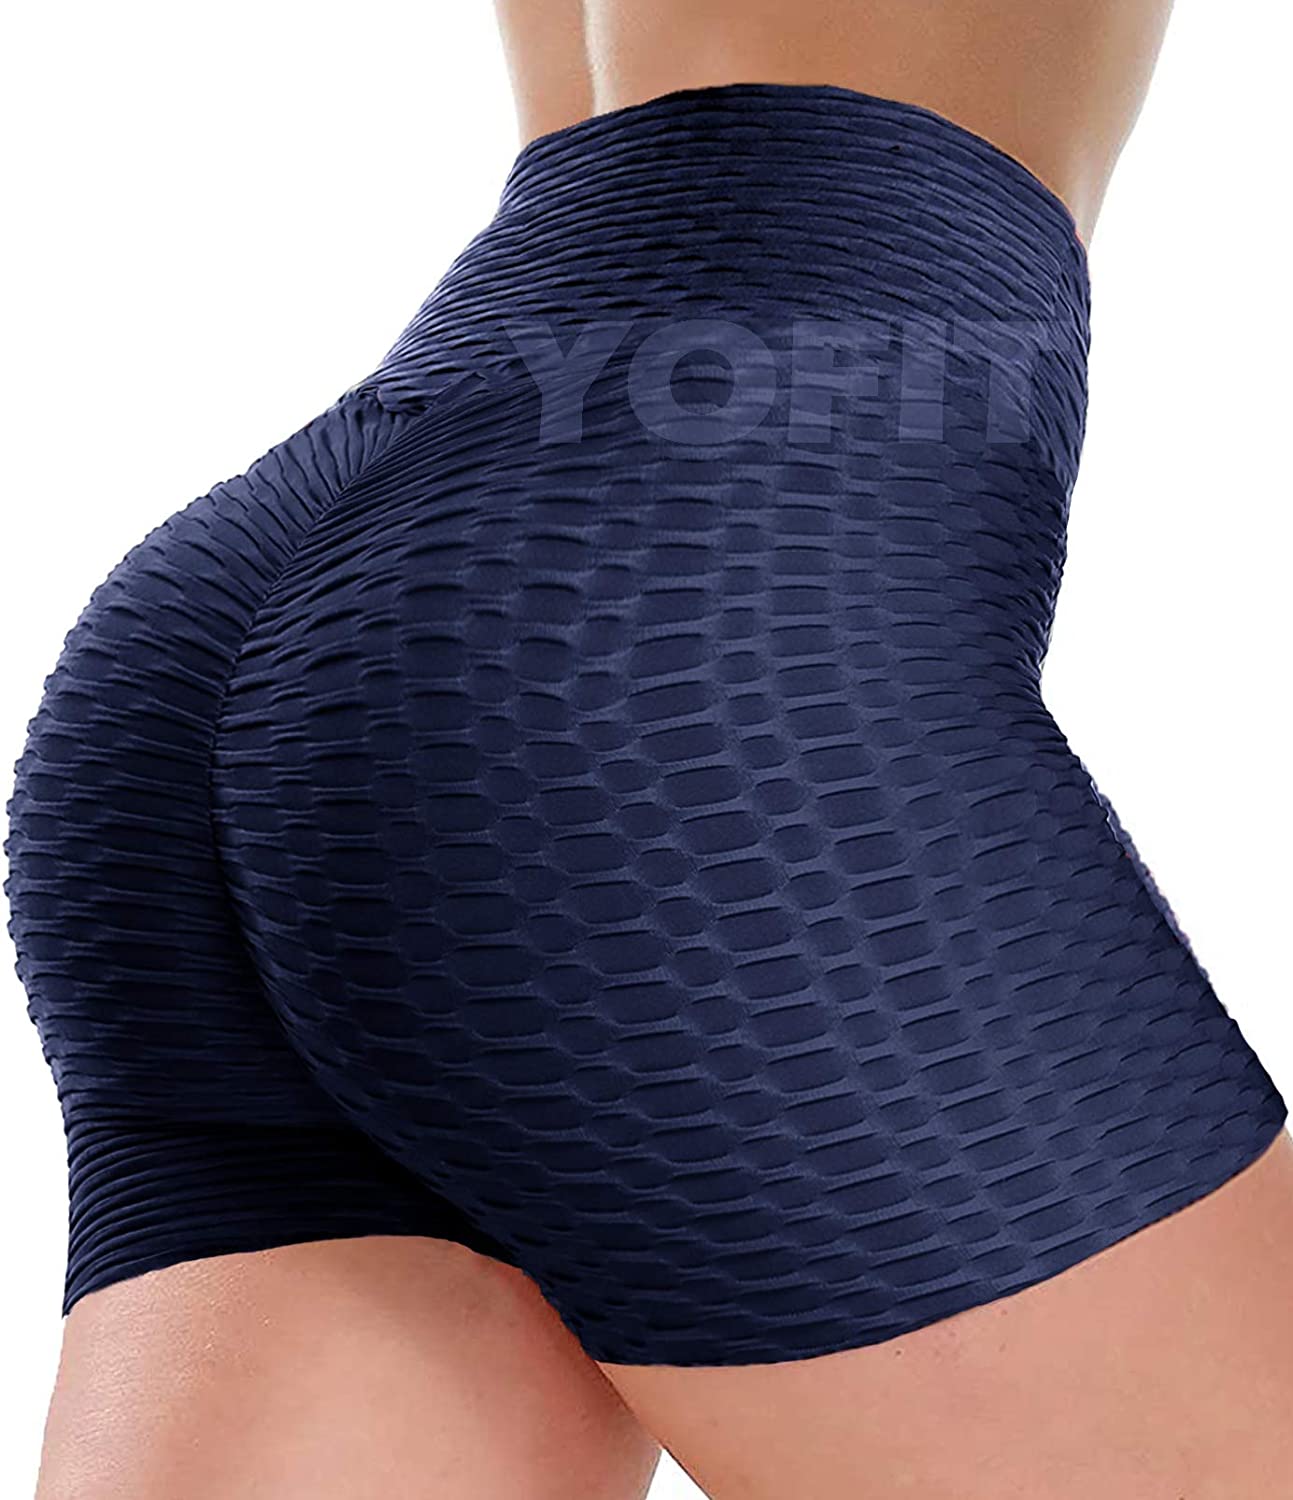 Trendy Butt Lifter Shorts at Low Bulk Prices 